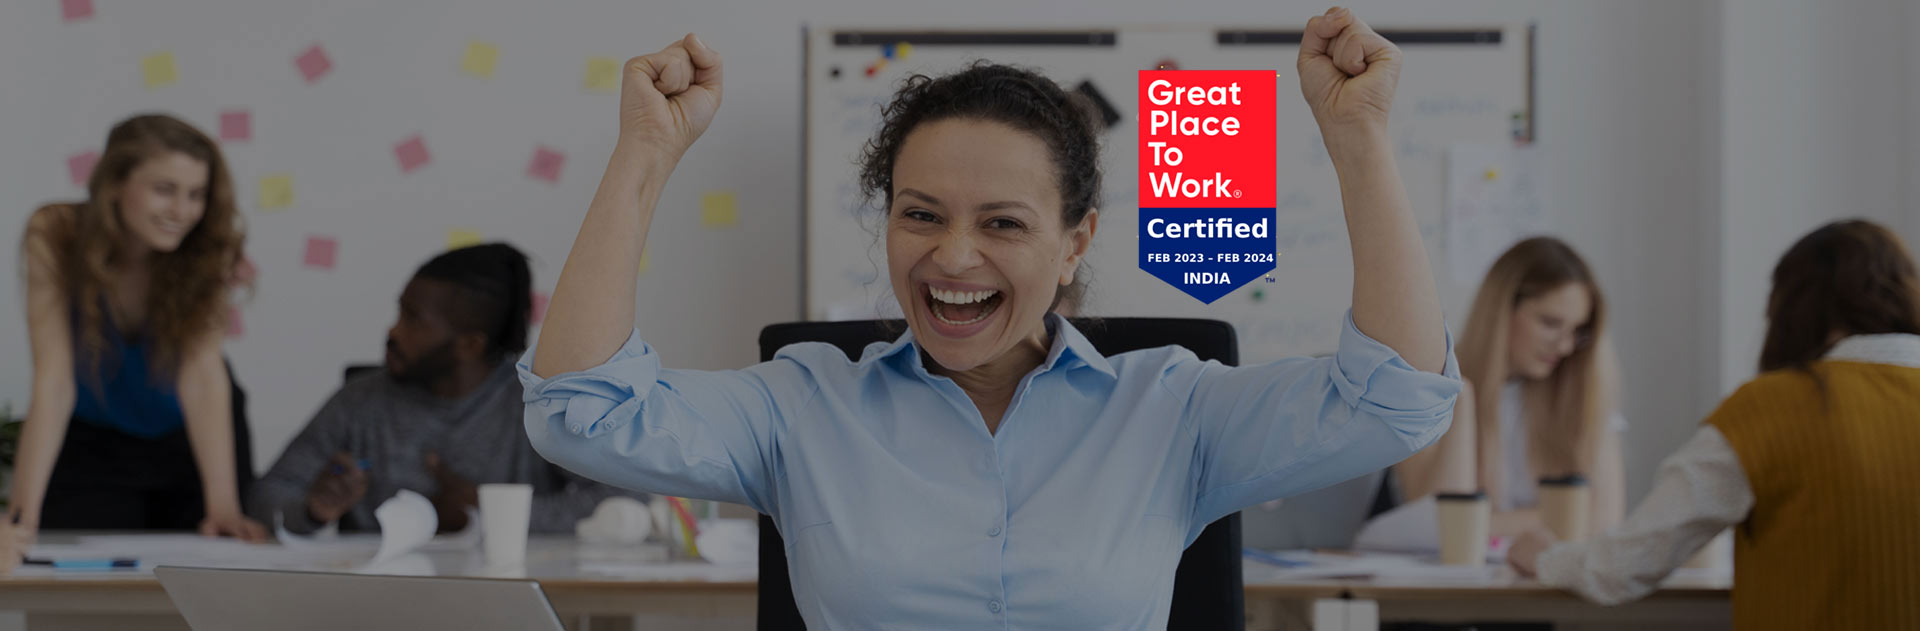 Rite Software - Great Place to Work Certified Now